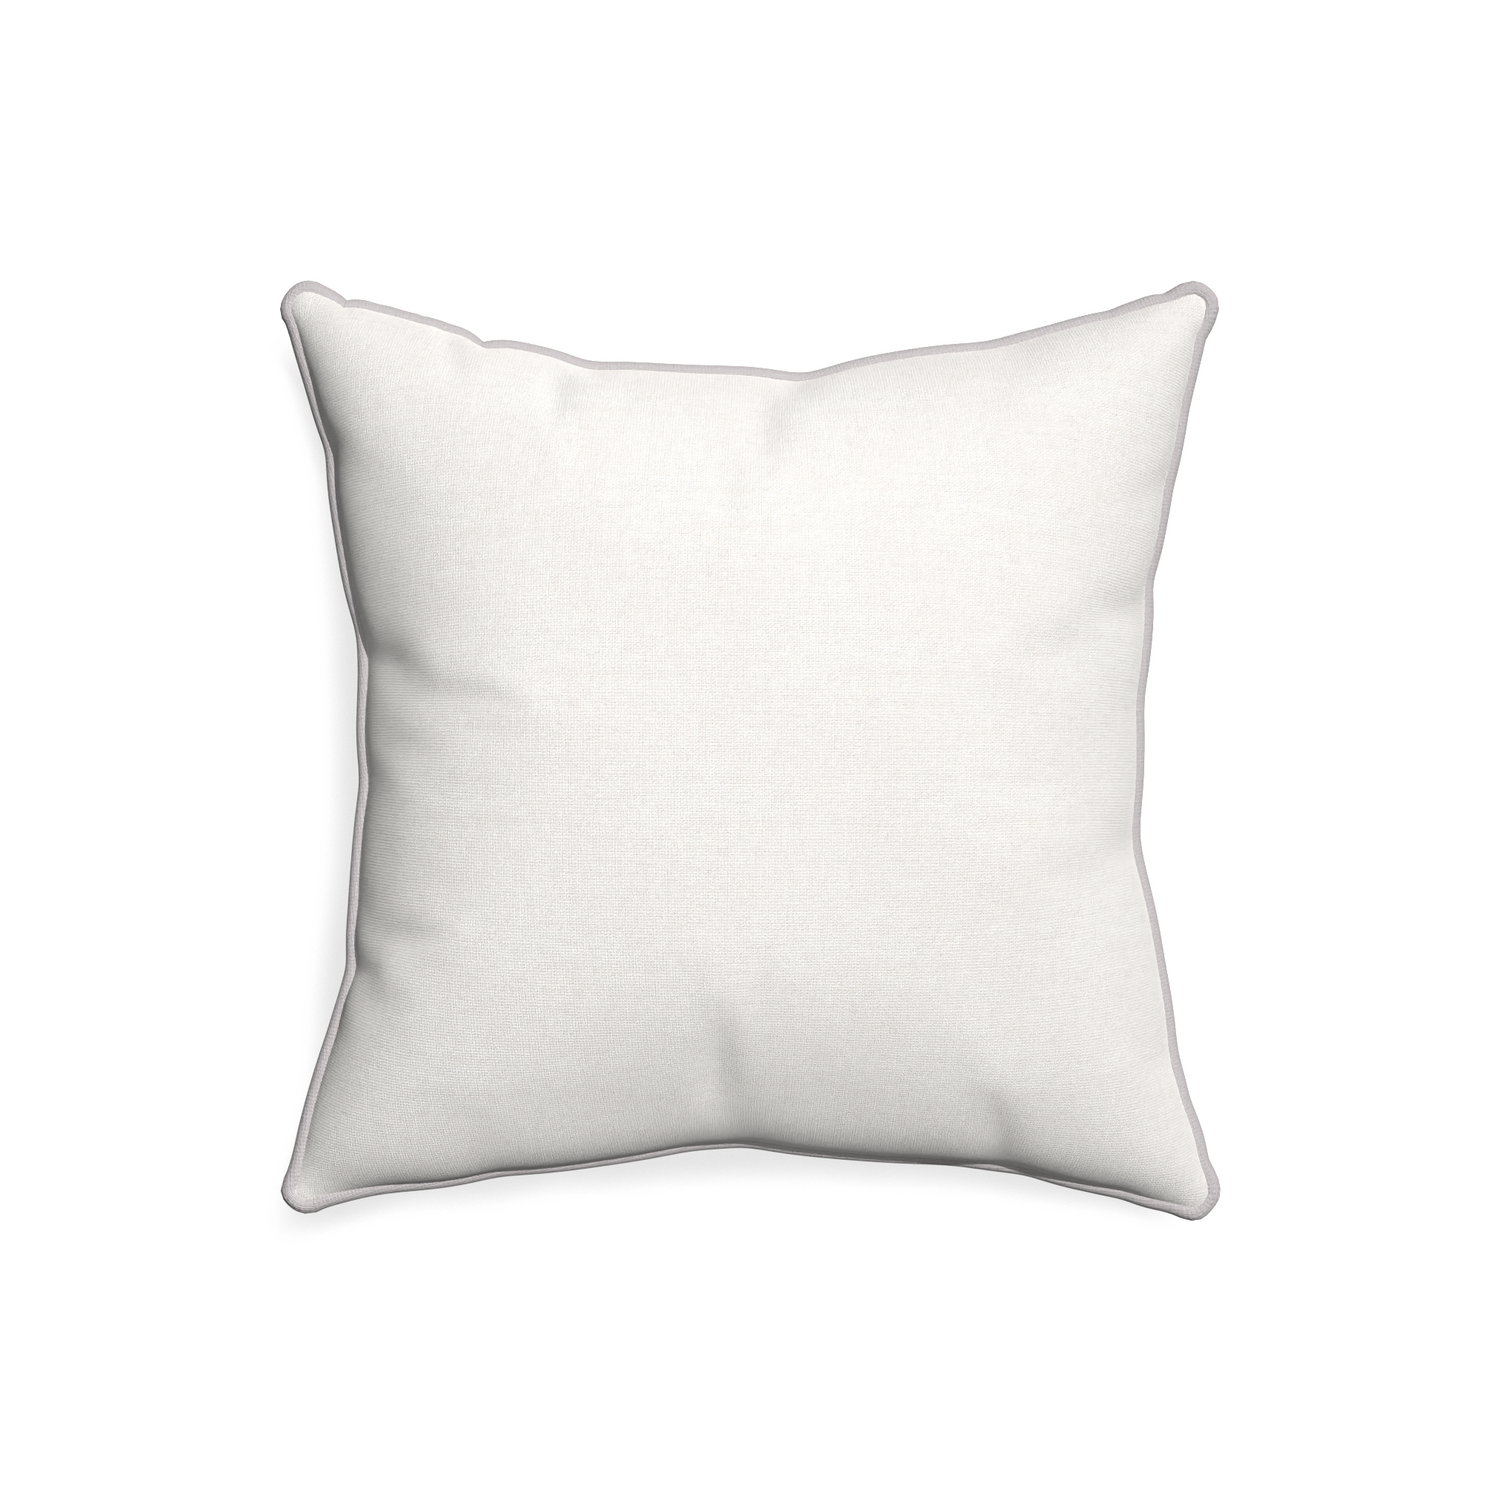 20-square flour custom pillow with pebble piping on white background